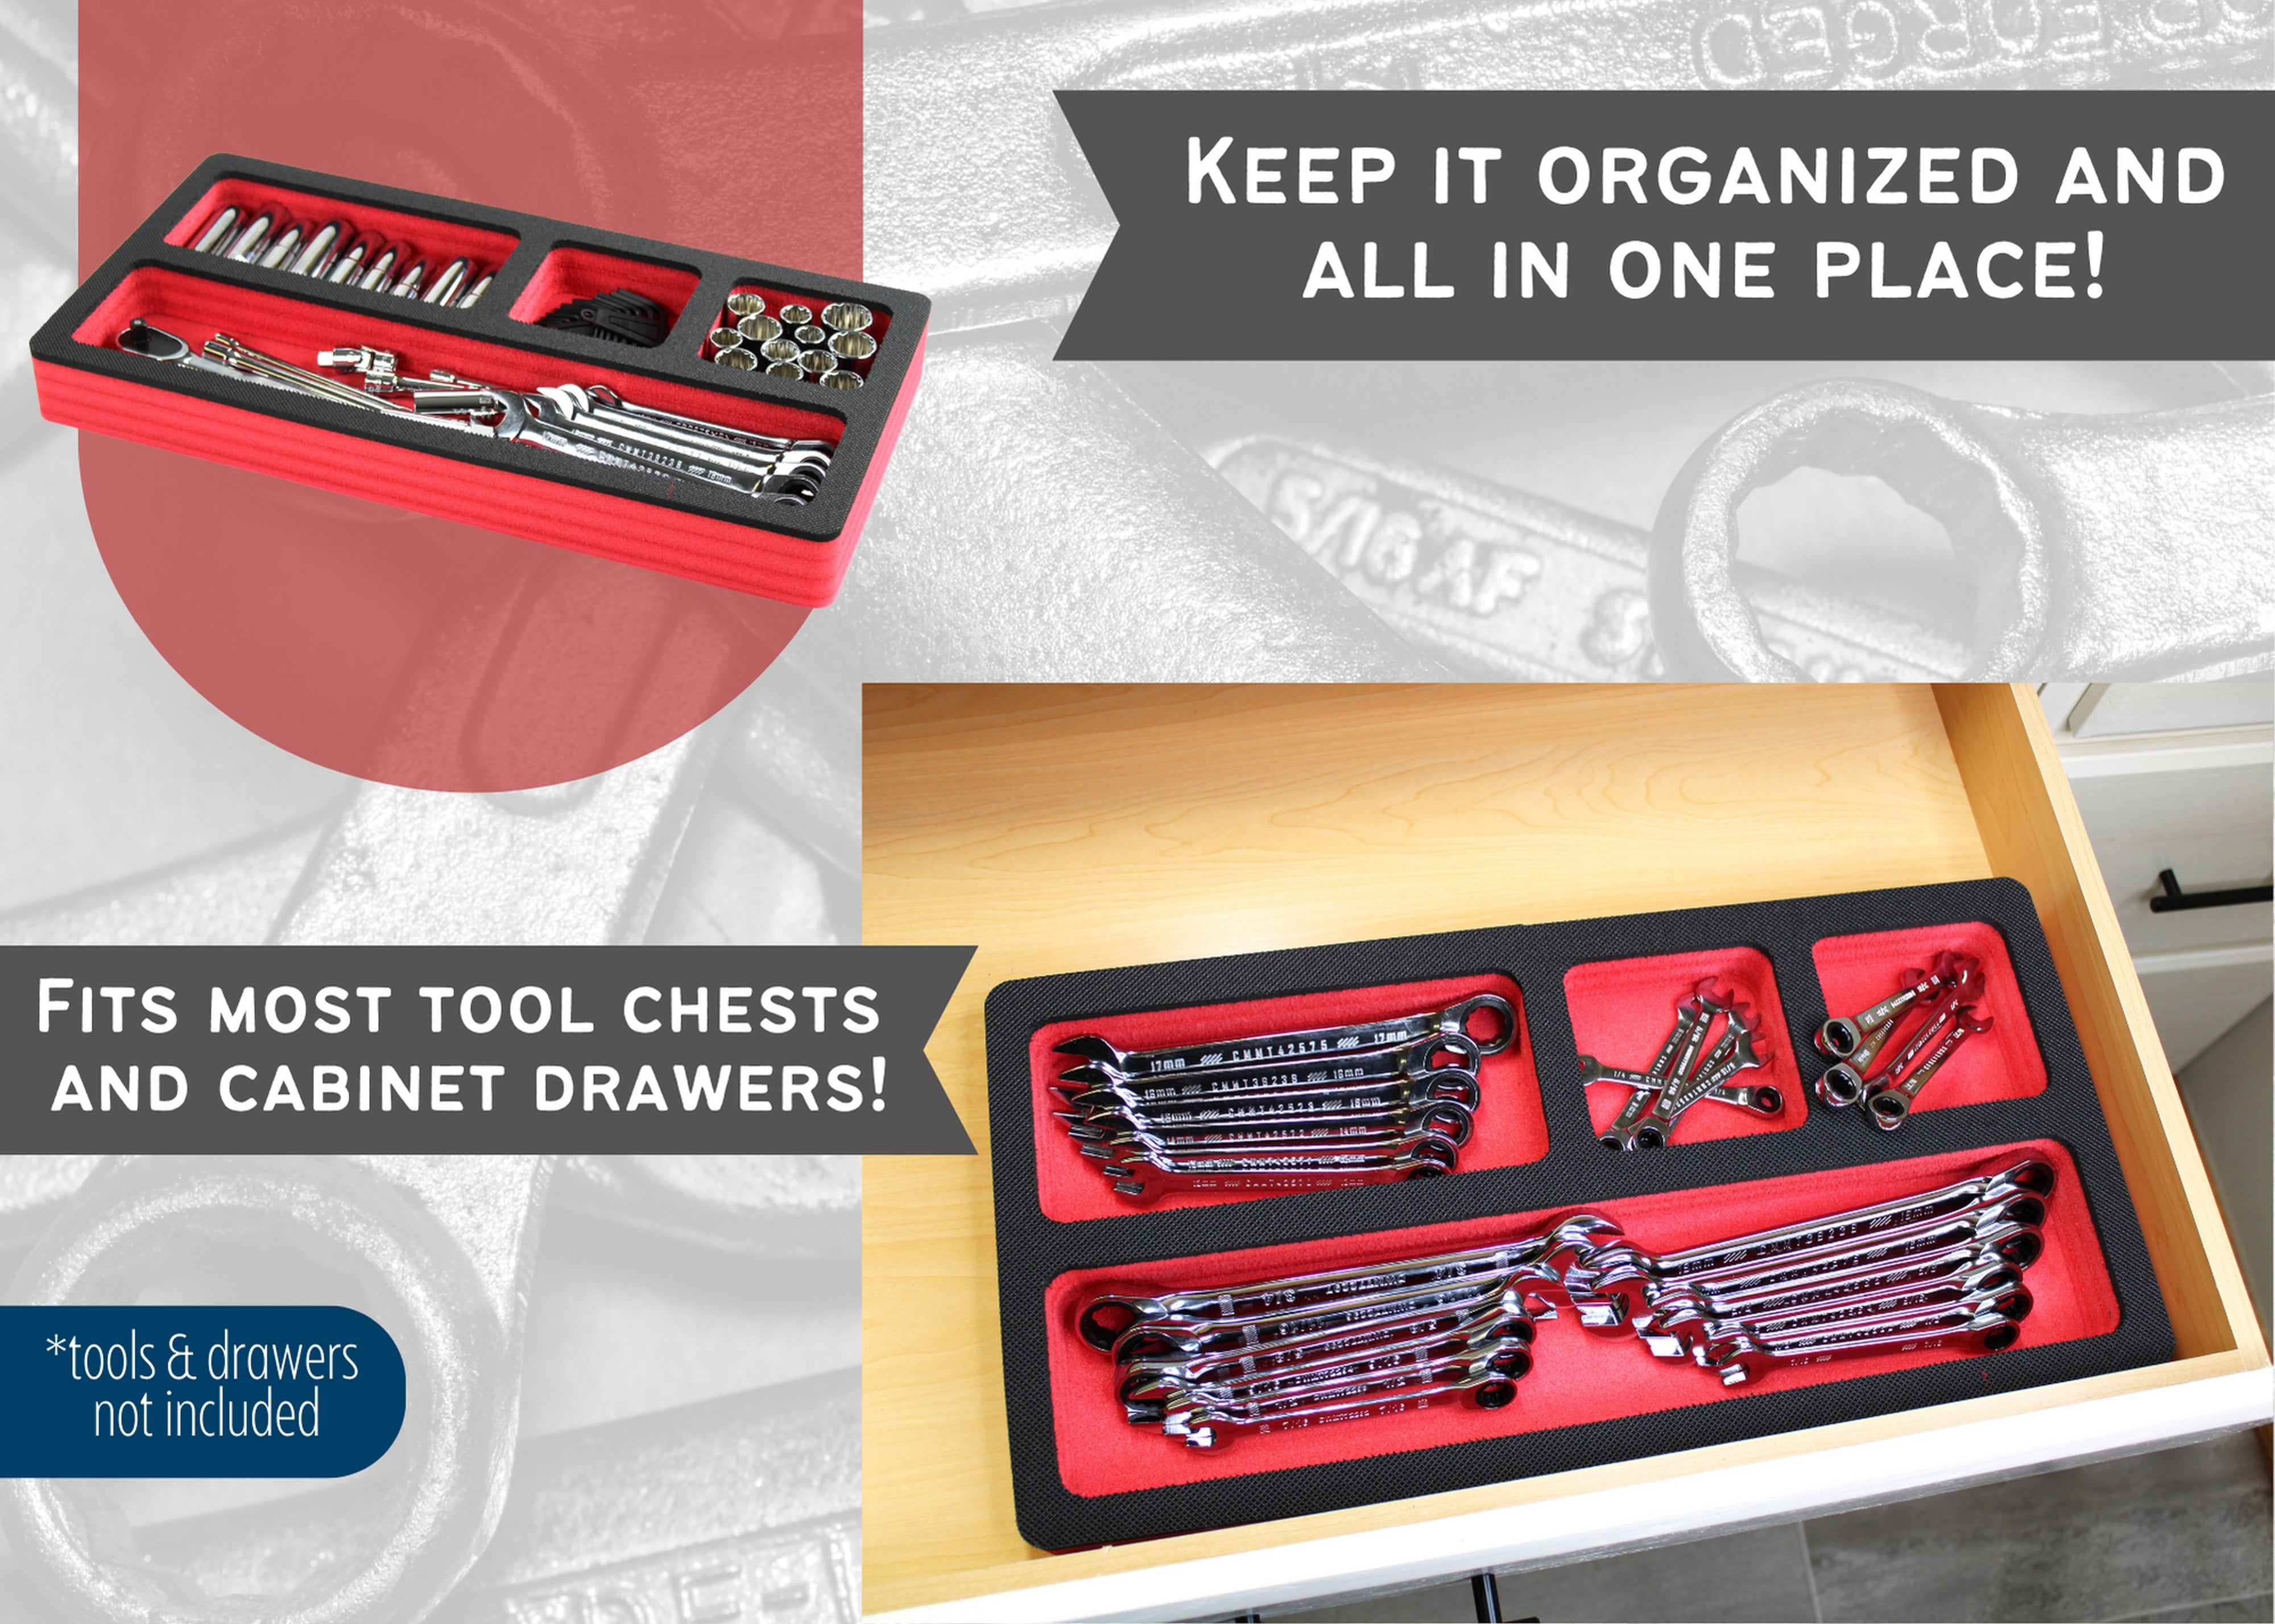 Tool Drawer Organizer Insert Red and Black Durable Foam Strong Non-Slip Anti-Rattle Bin Holder Tray 20 x 10 Inches 4 Pockets Fits Craftsman Husky Kobalt Milwaukee and Many Others